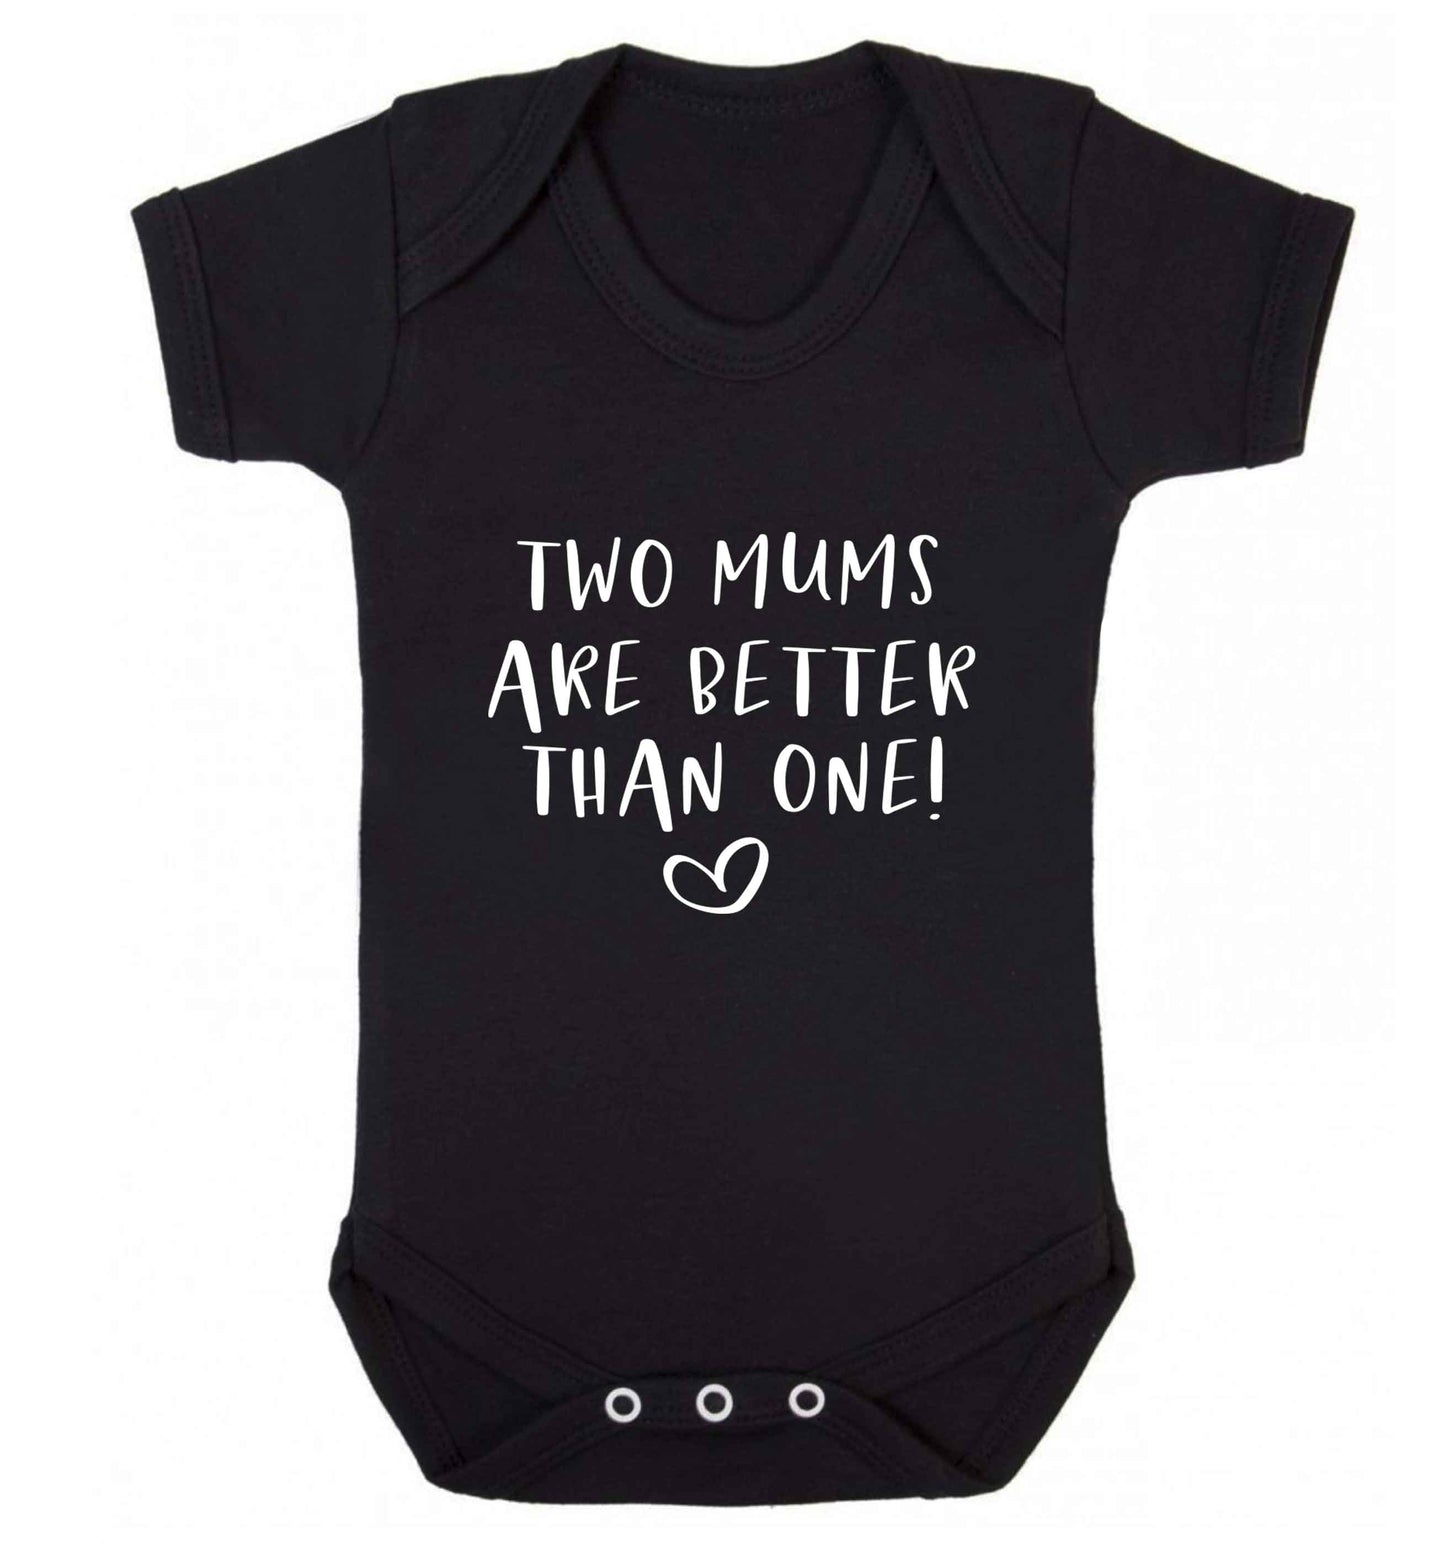 Two mums are better than one baby vest black 18-24 months